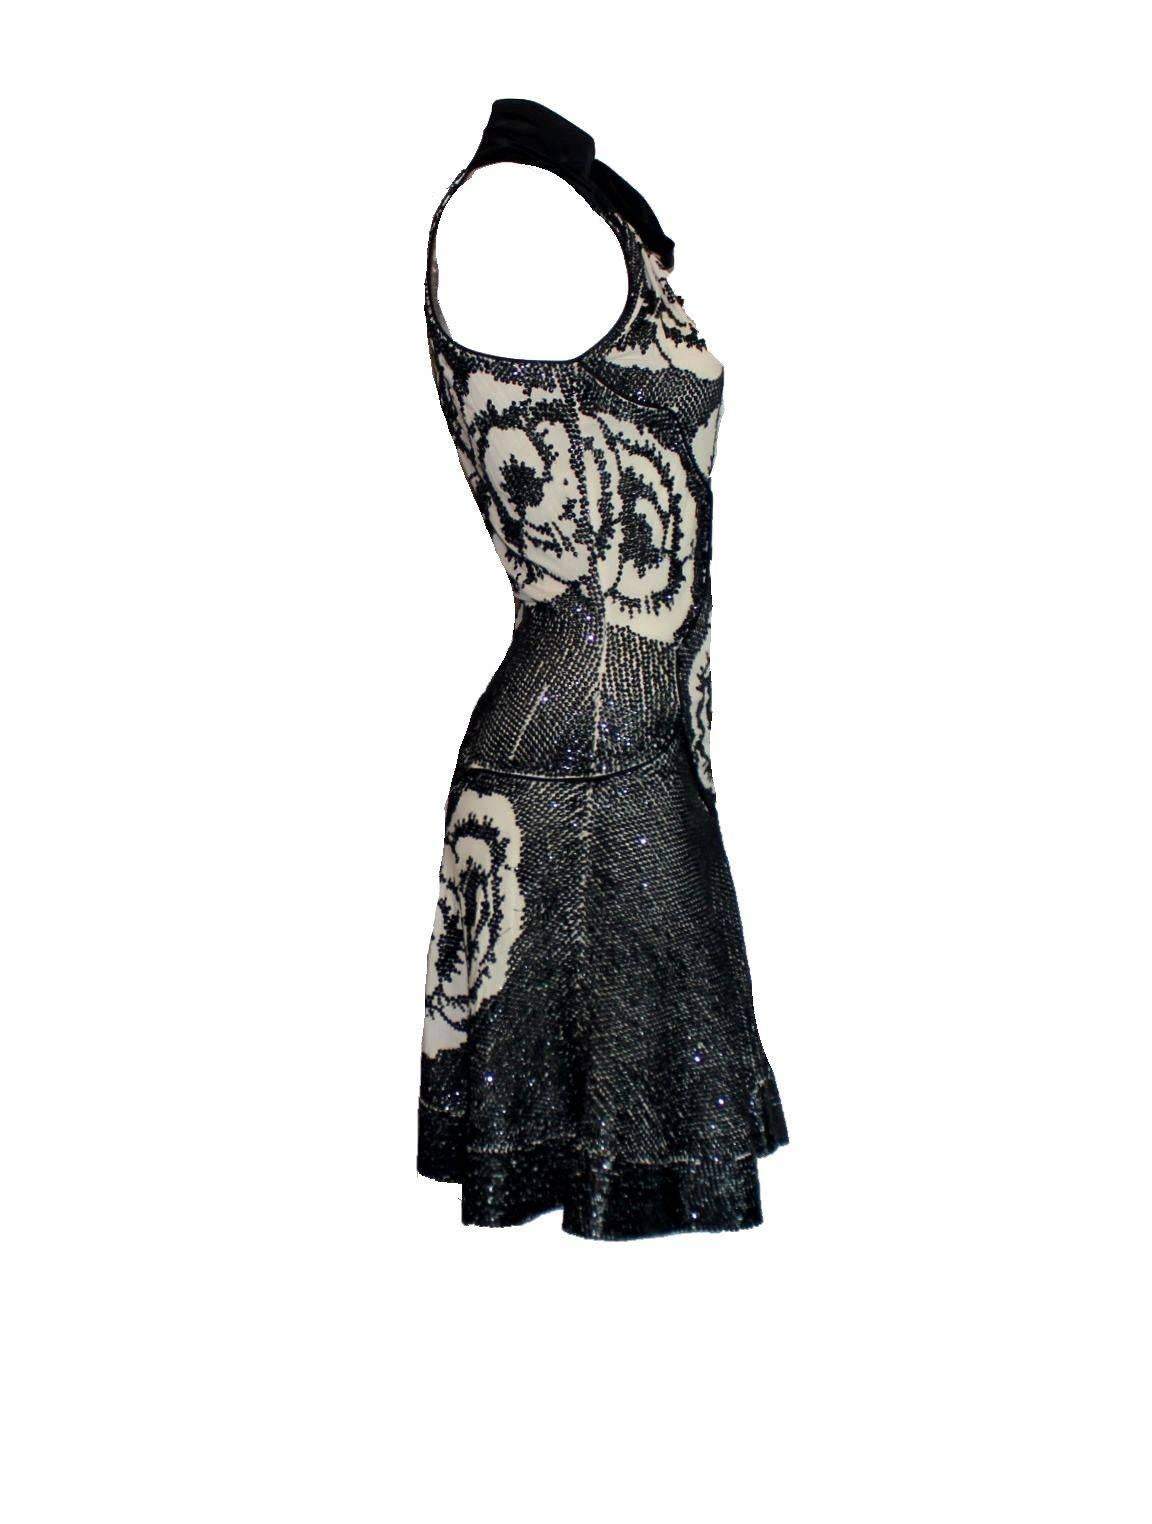 Roberto Cavalli Evening Dress
Monochrome colors
Breathtaking hand-beading all over in rose floral design
Closes with black silk bow 
Made in Italy
Dry Clean Only
Retails for 6459$